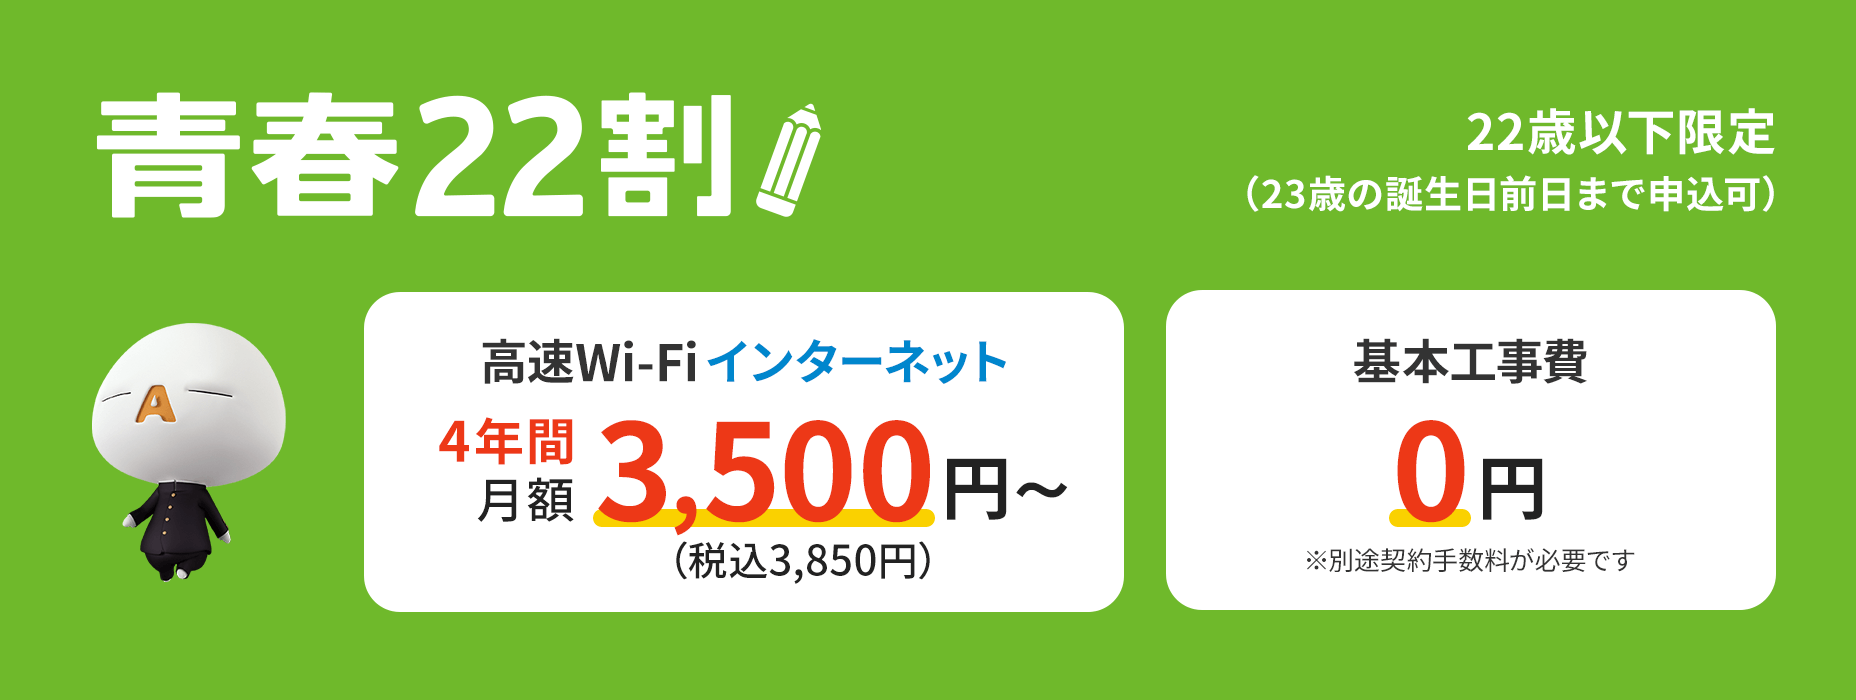 J:COM Seishun 22 Wari is exclusively available to university and vocational school students living in apartment complexes. Enjoy great deals on high-speed Wi-Fi internet for up to four years!